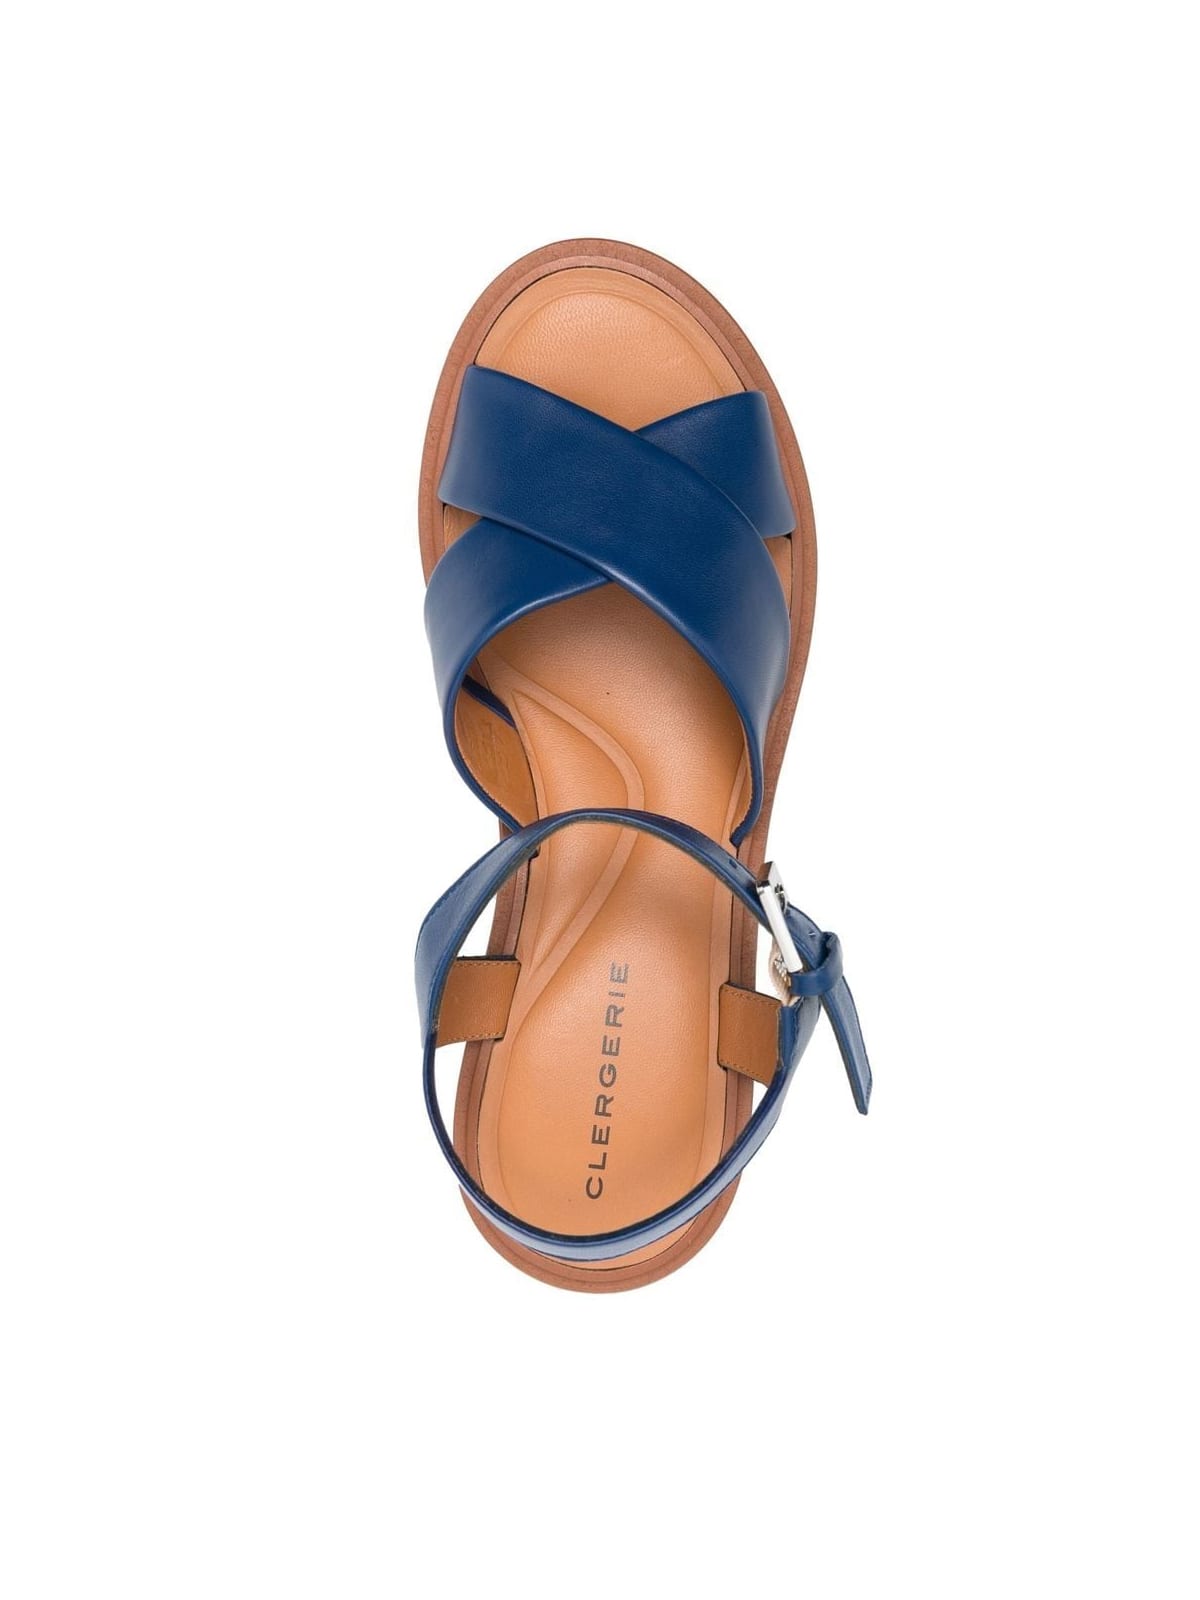 Shop Clergerie Charline9 Criss Cross Sandal With Closure At The Ankles In Navy Nap